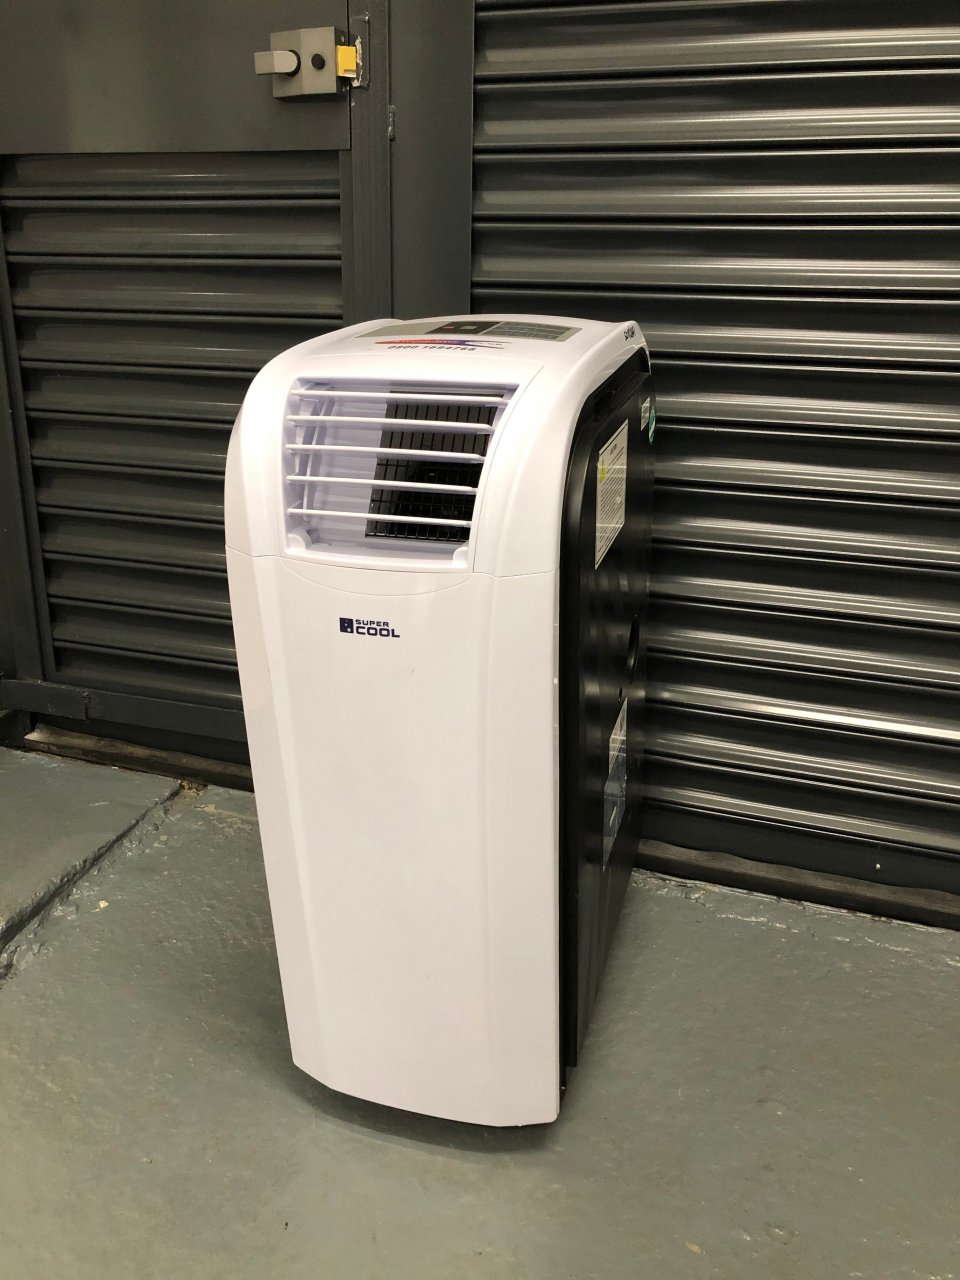 Air Conditioner Rental Services For Offices